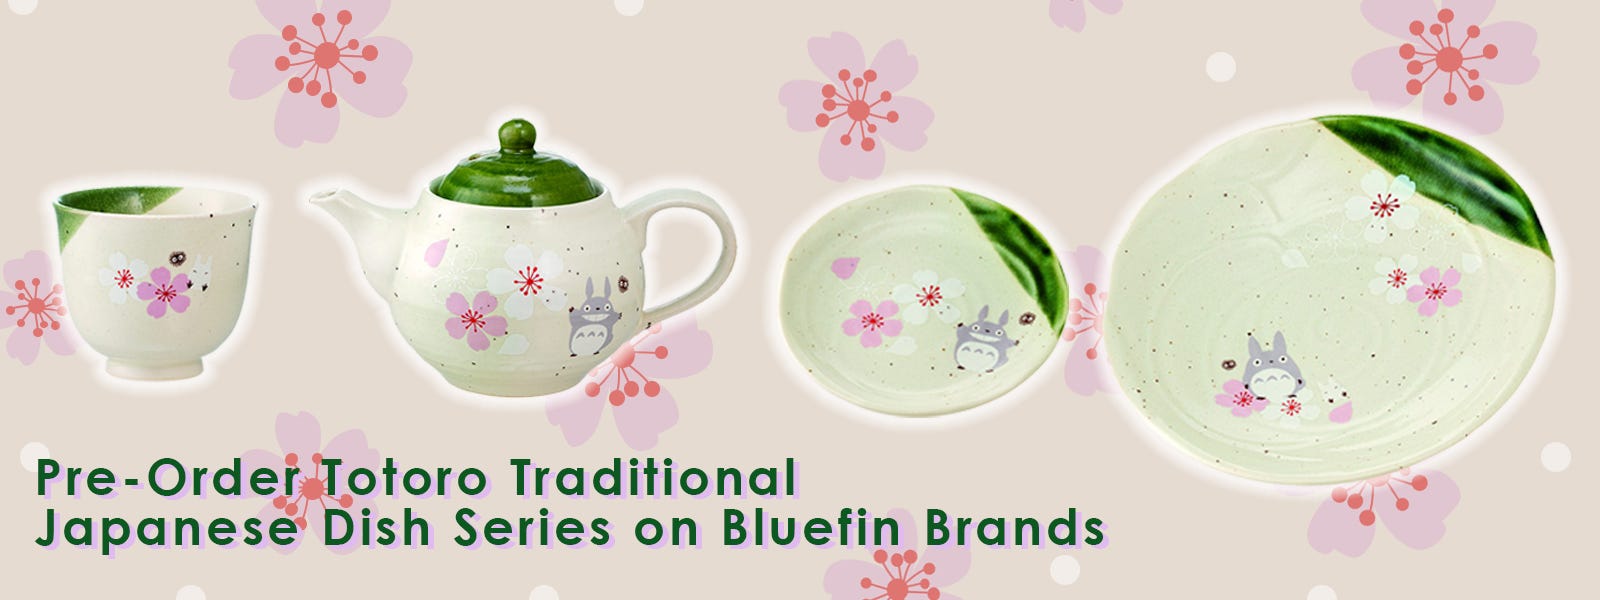 Pre-Order Totoro Traditional Japanese Dish Series on Bluefin Brands 